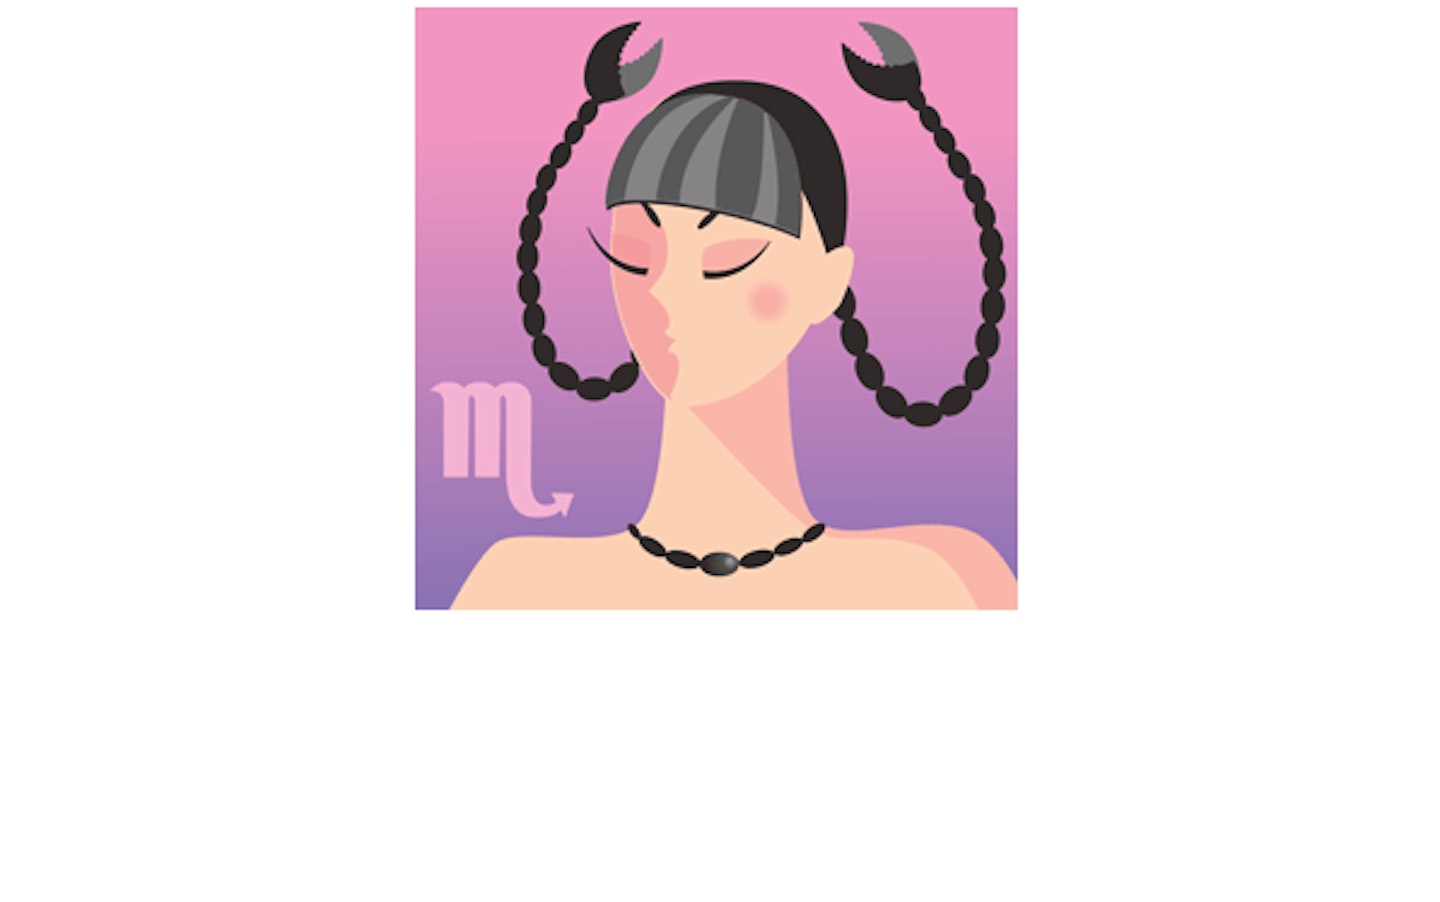 Illustration of woman with scorpion claws at the ends of her plaited hair